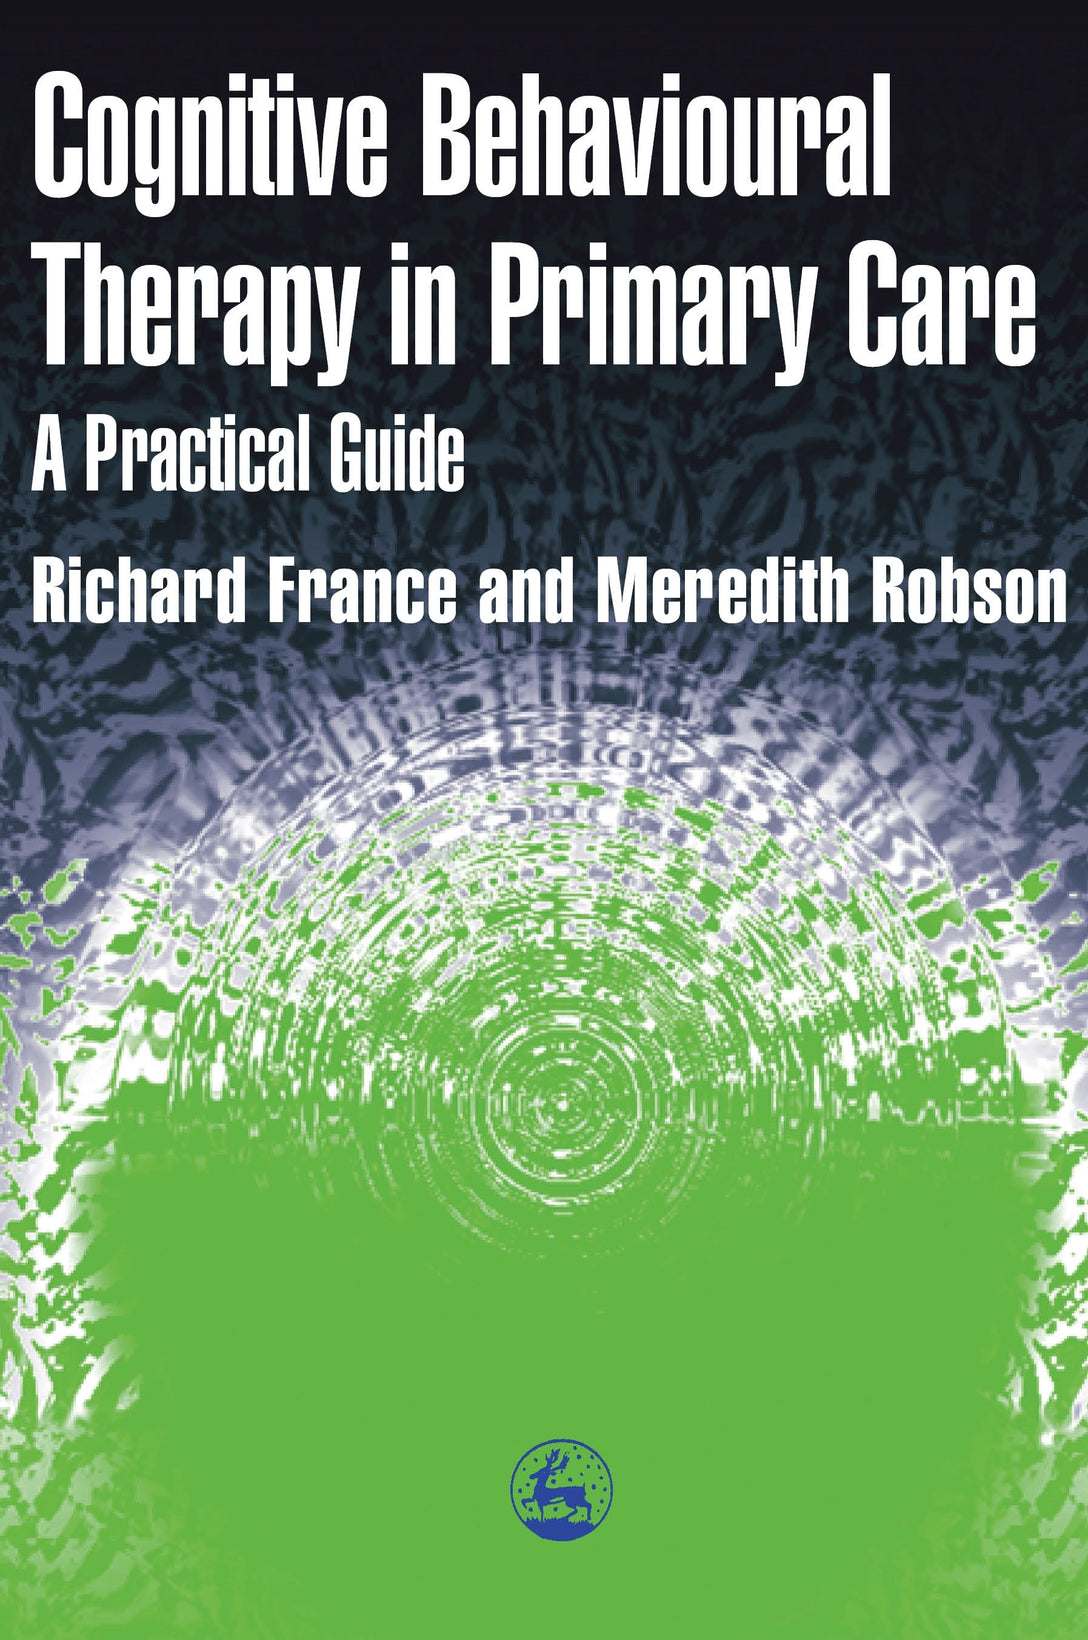 Cognitive Behaviour Therapy in Primary Care by Richard France, Meredith Robson